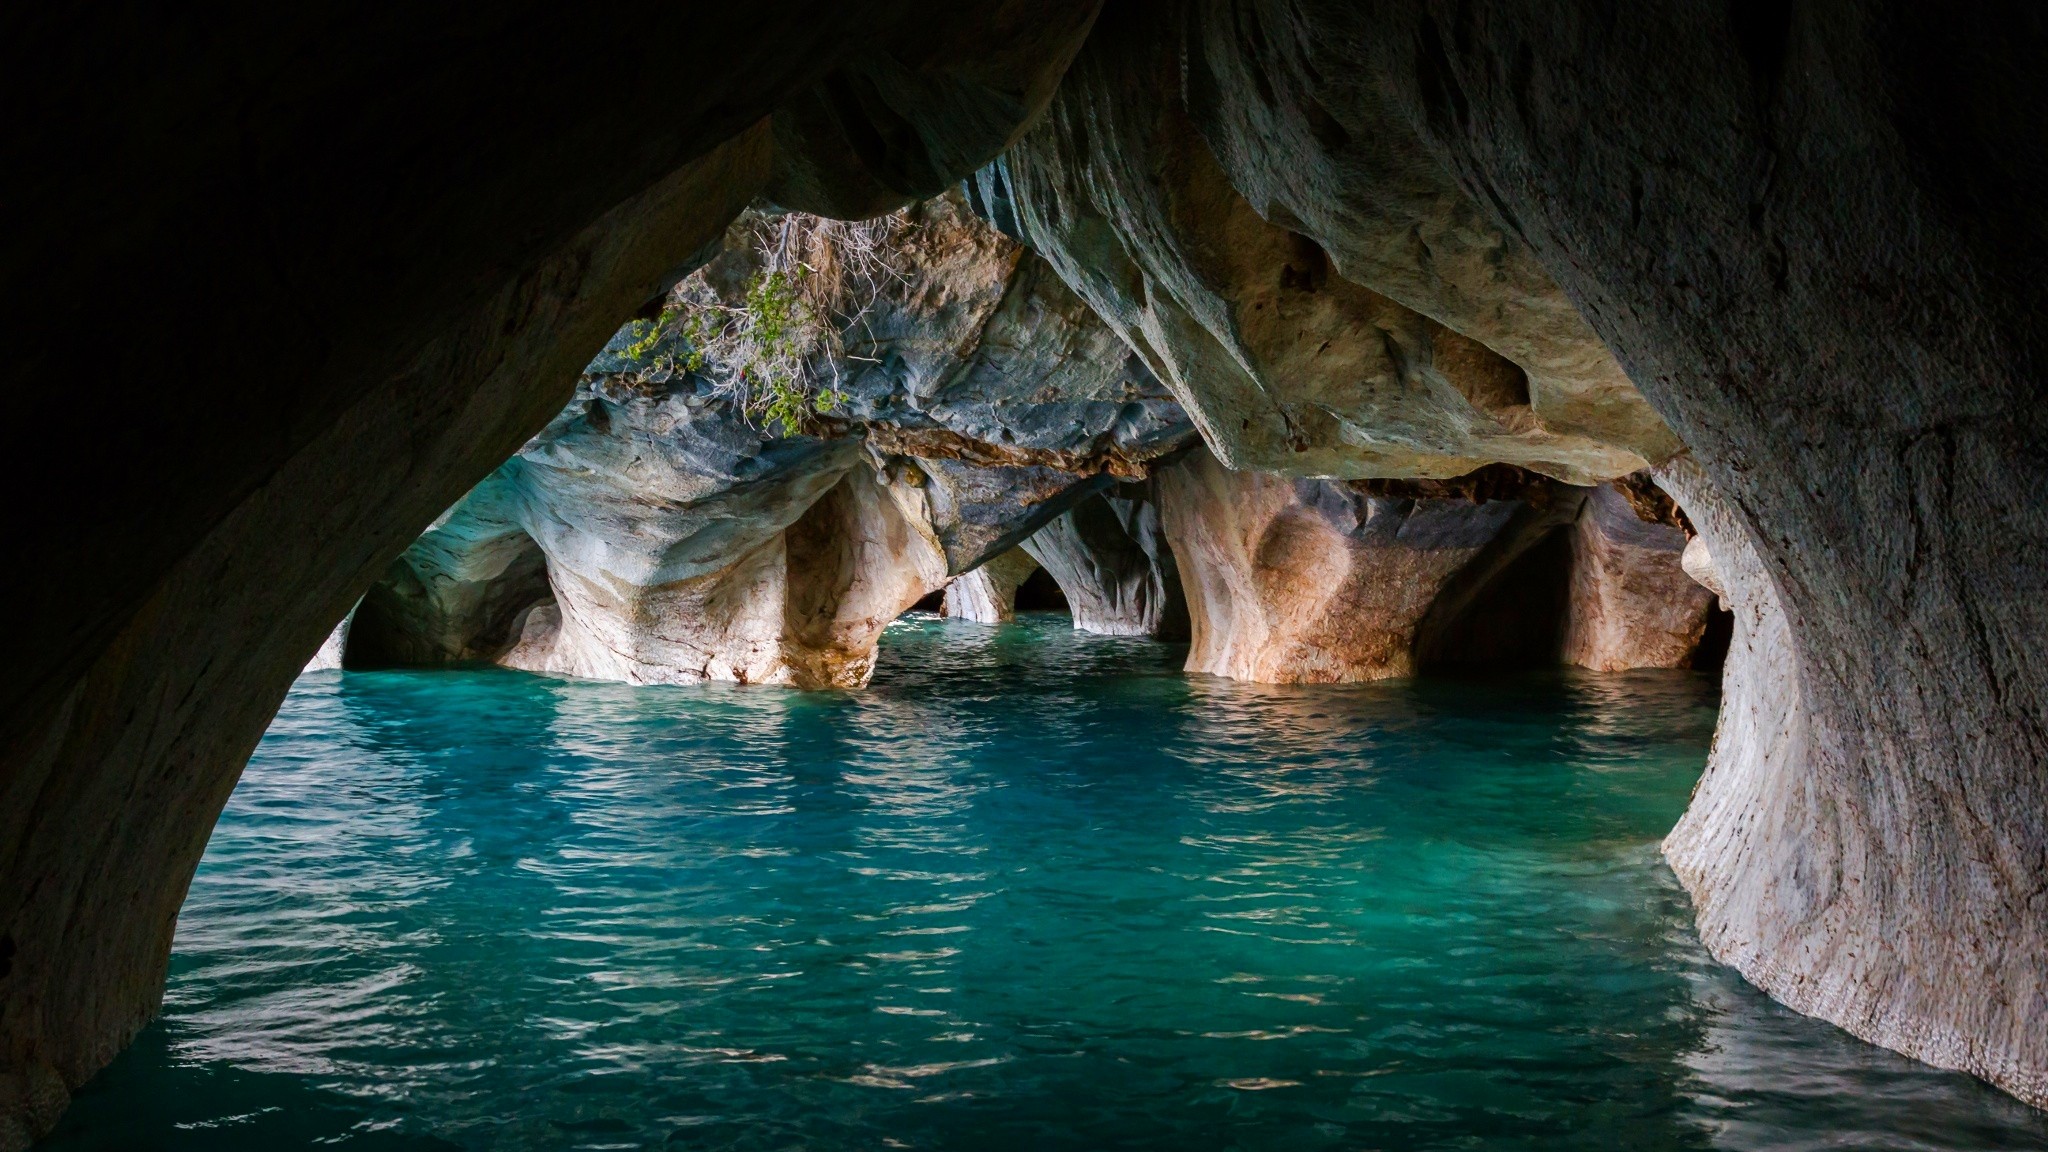 General 2048x1152 nature landscape cave lake turquoise water erosion marble cathedral rocks Chile South America